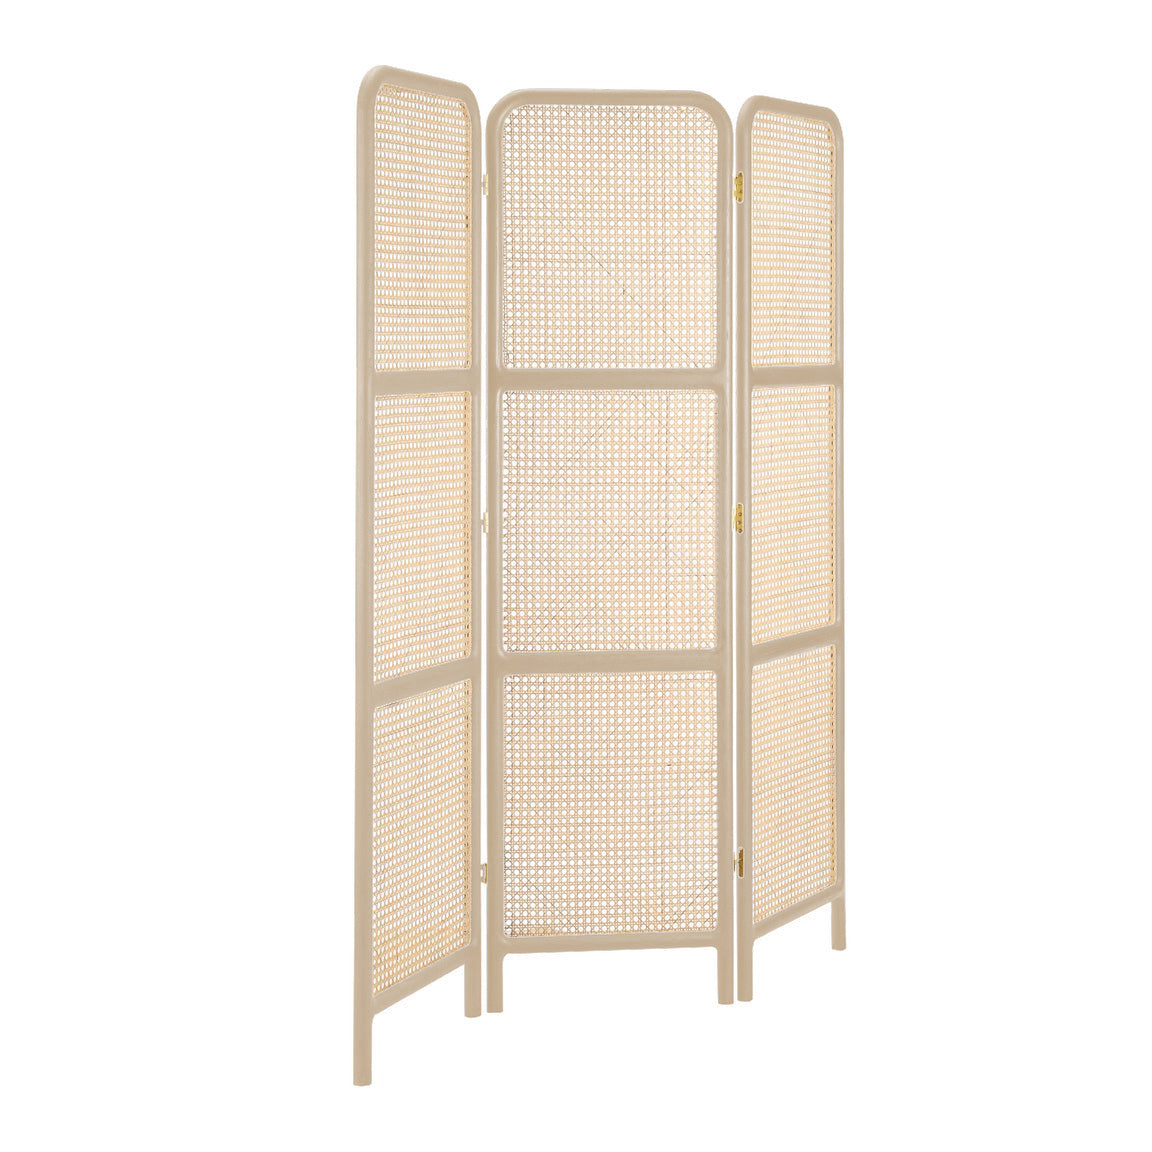 Soleil Screen, Washed White Ash - Image 3